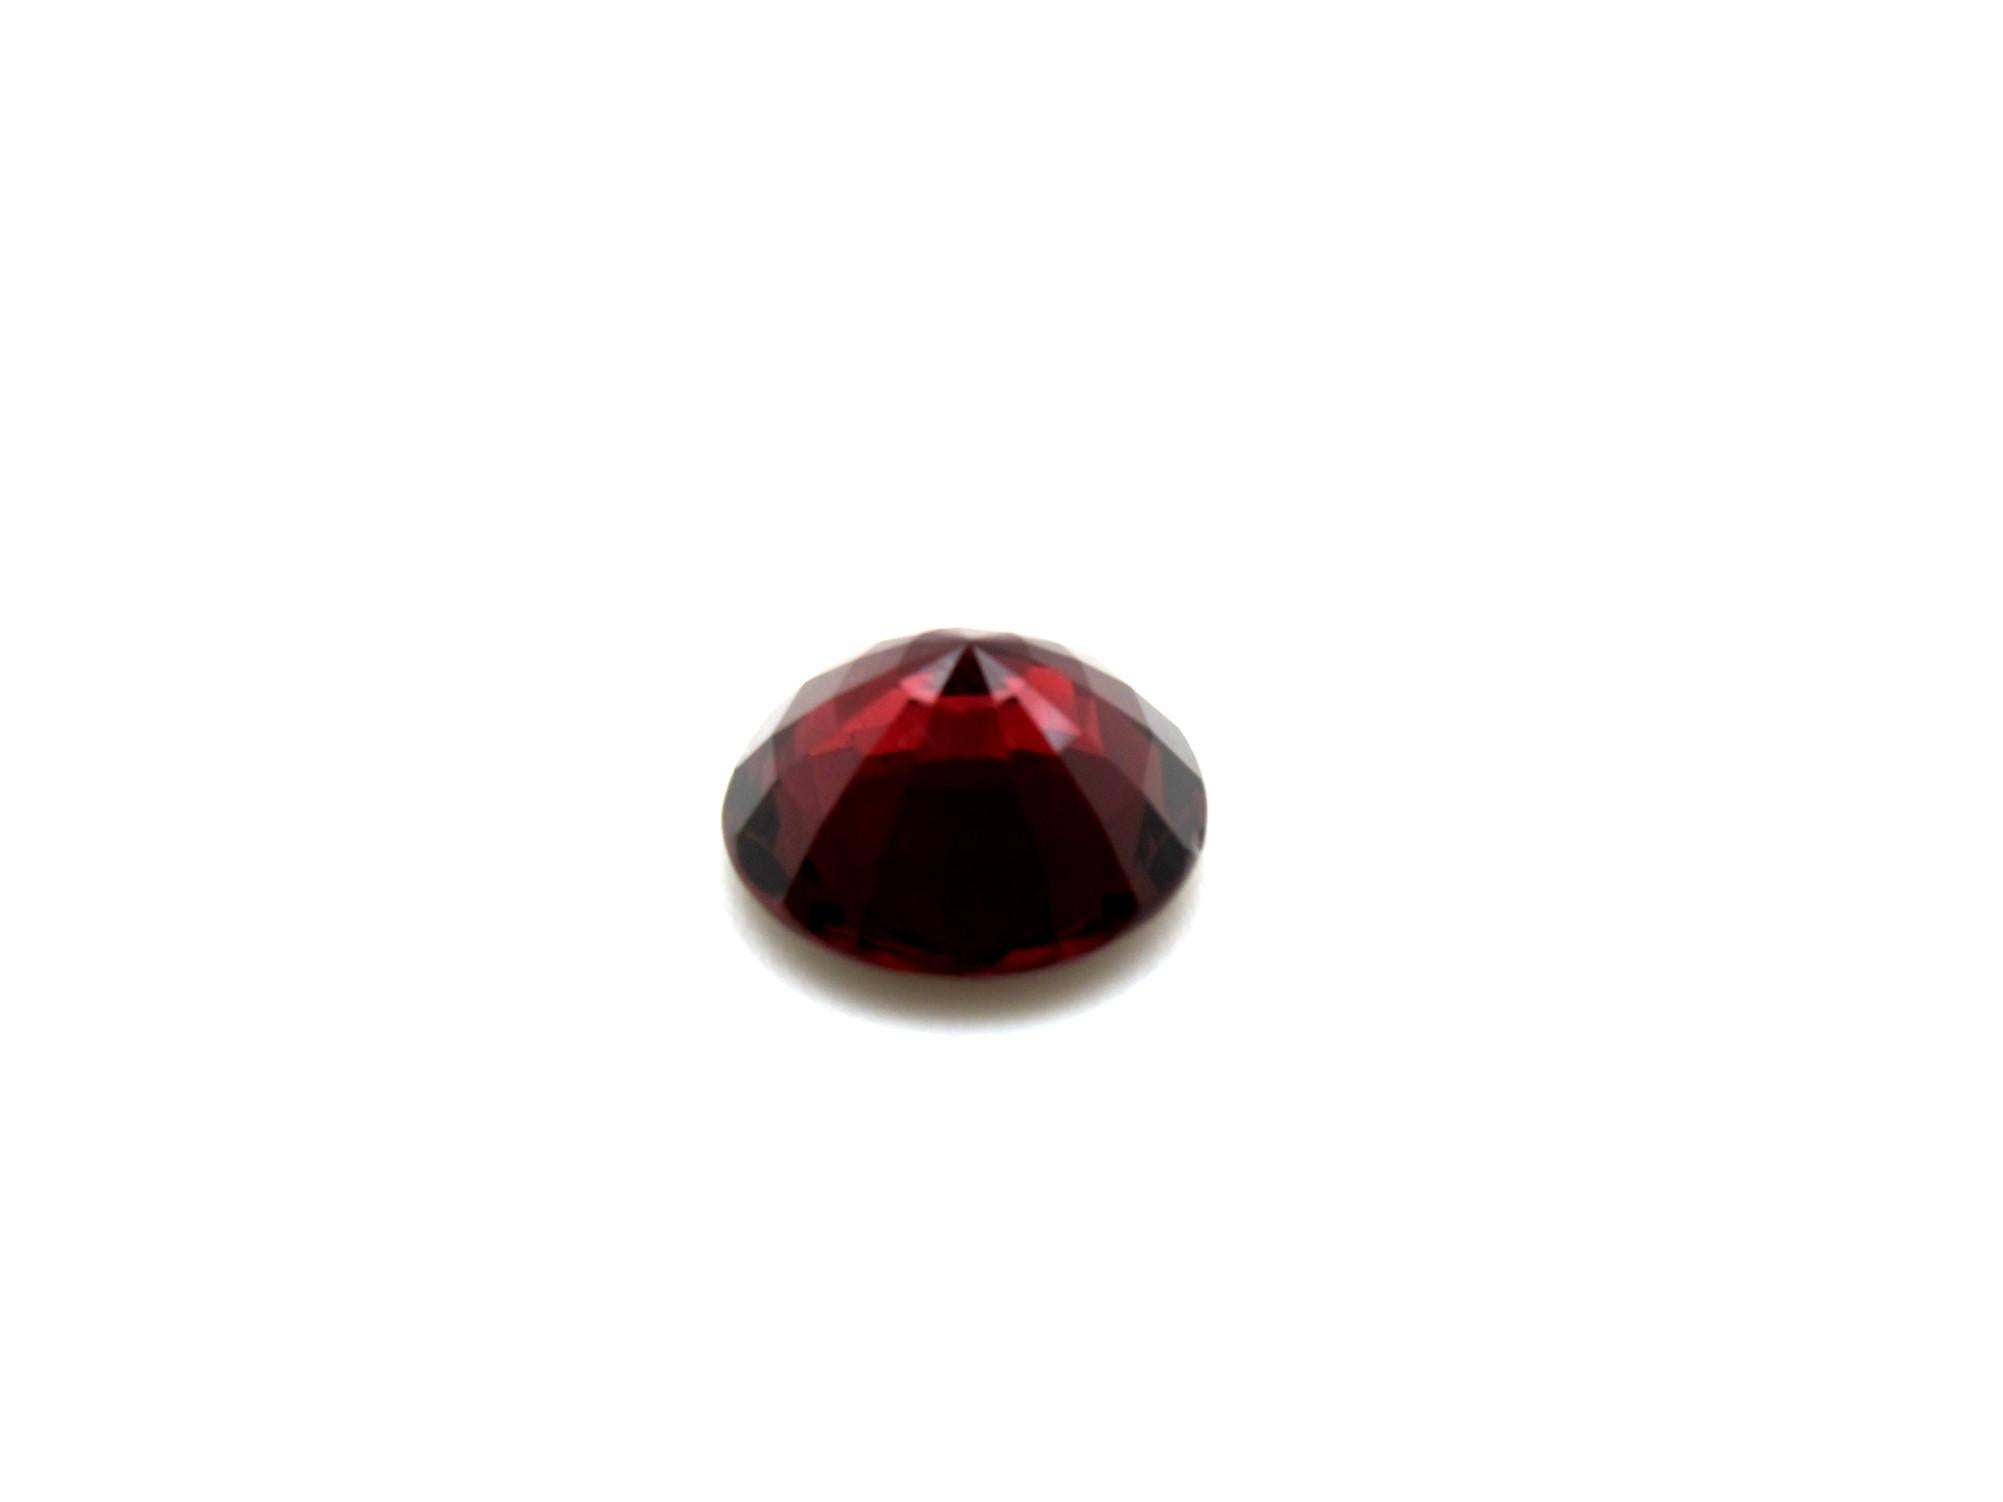 Unheated 7.84 Carat Red Spinel Round, Loose Gemstone, GIA Certified For Sale 3